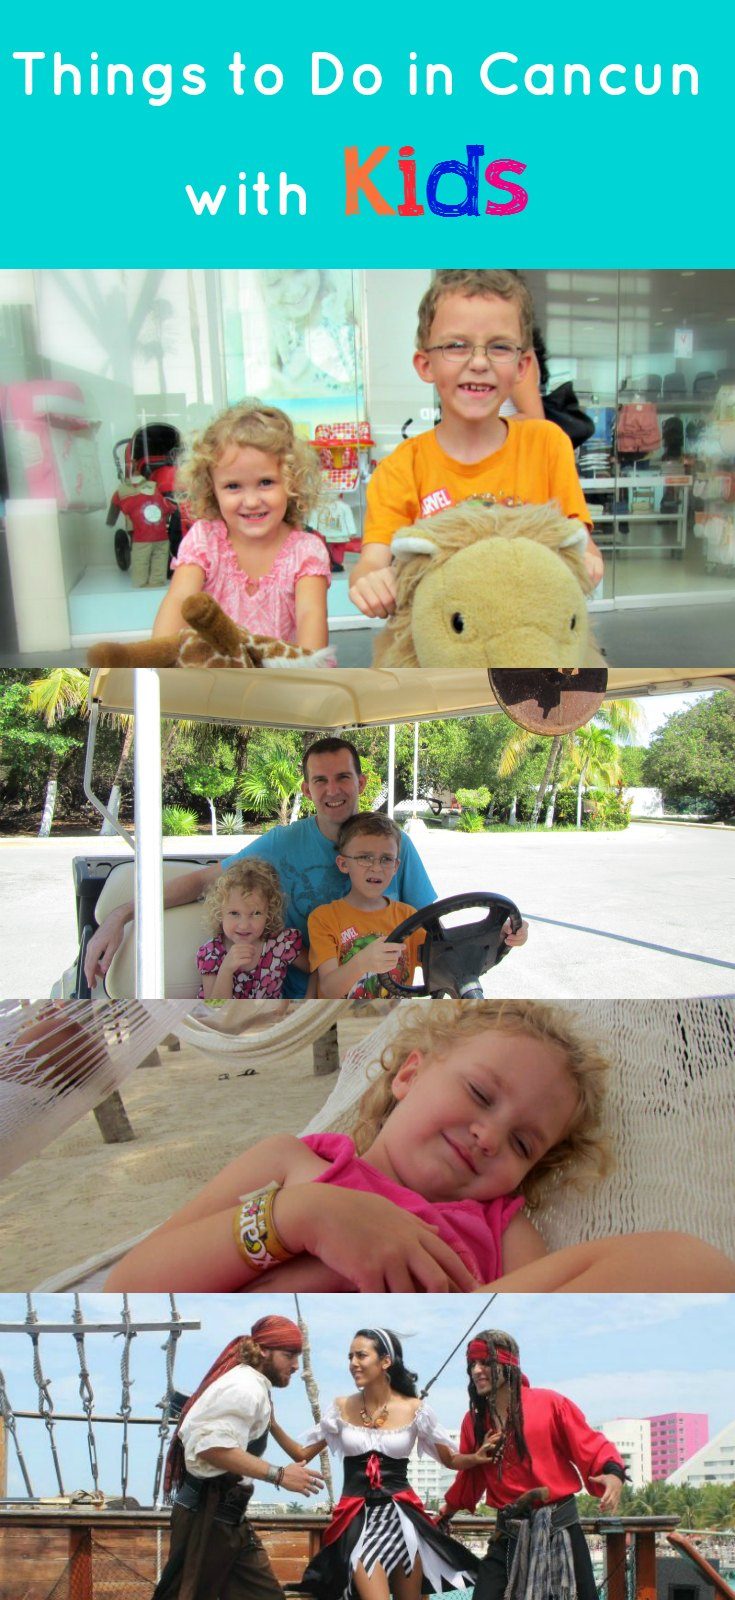 Things to Do in Cancun With Kids